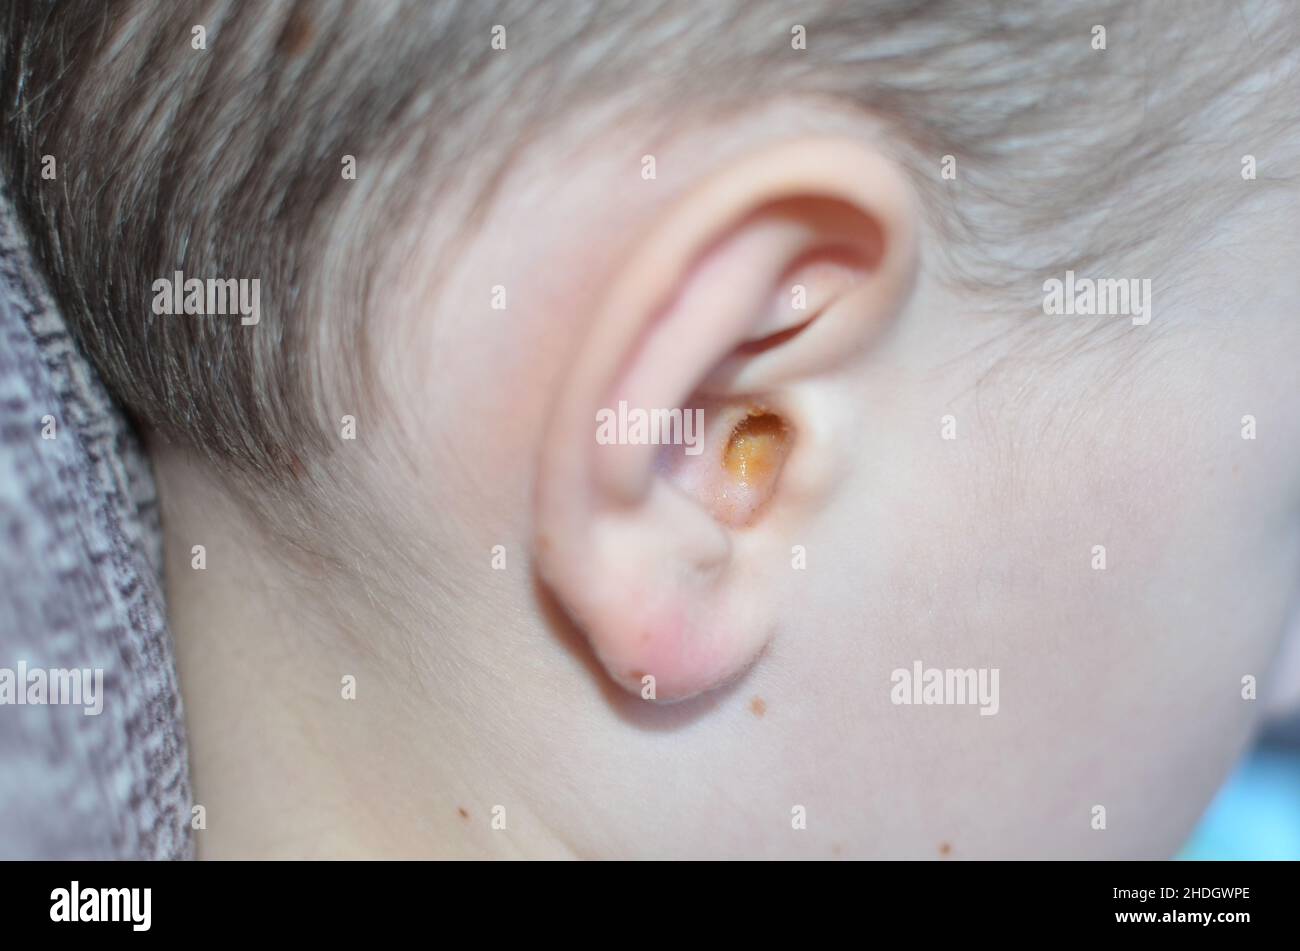 dirty ear with yellow gray in a fair-skinned boy Stock Photo